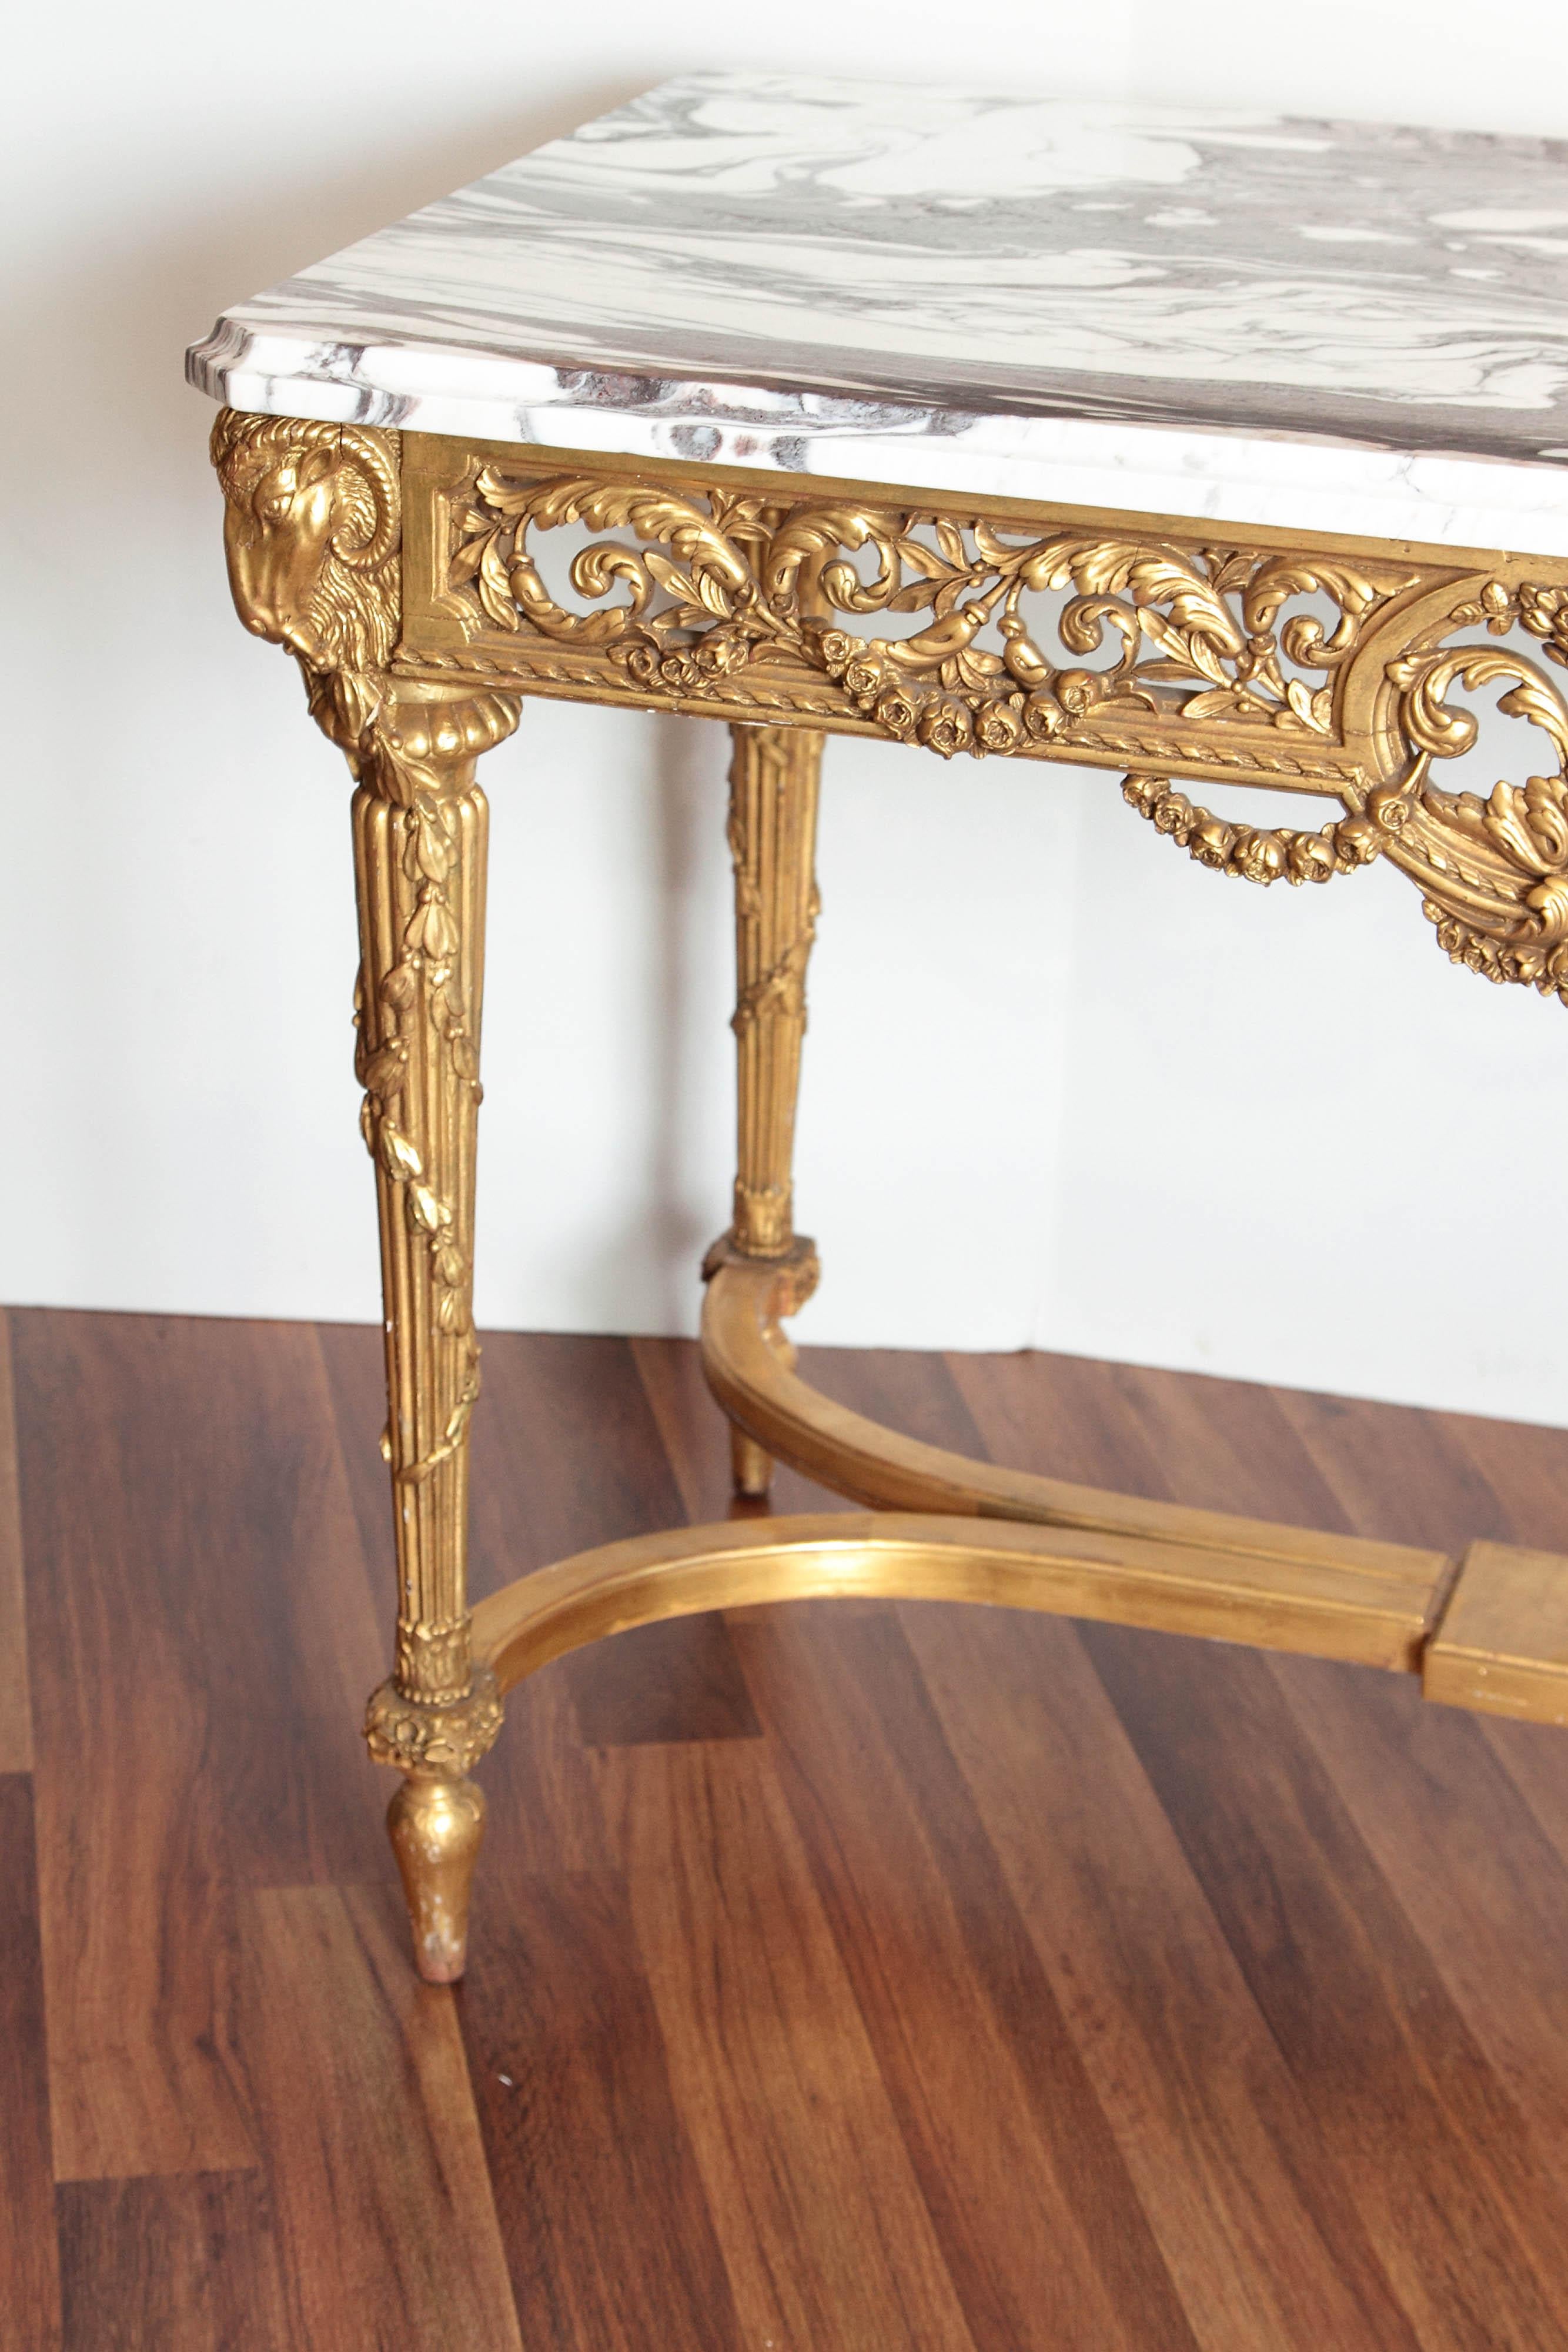 Giltwood 19th Century French Louis XVI Gilt Carved Salon Table For Sale